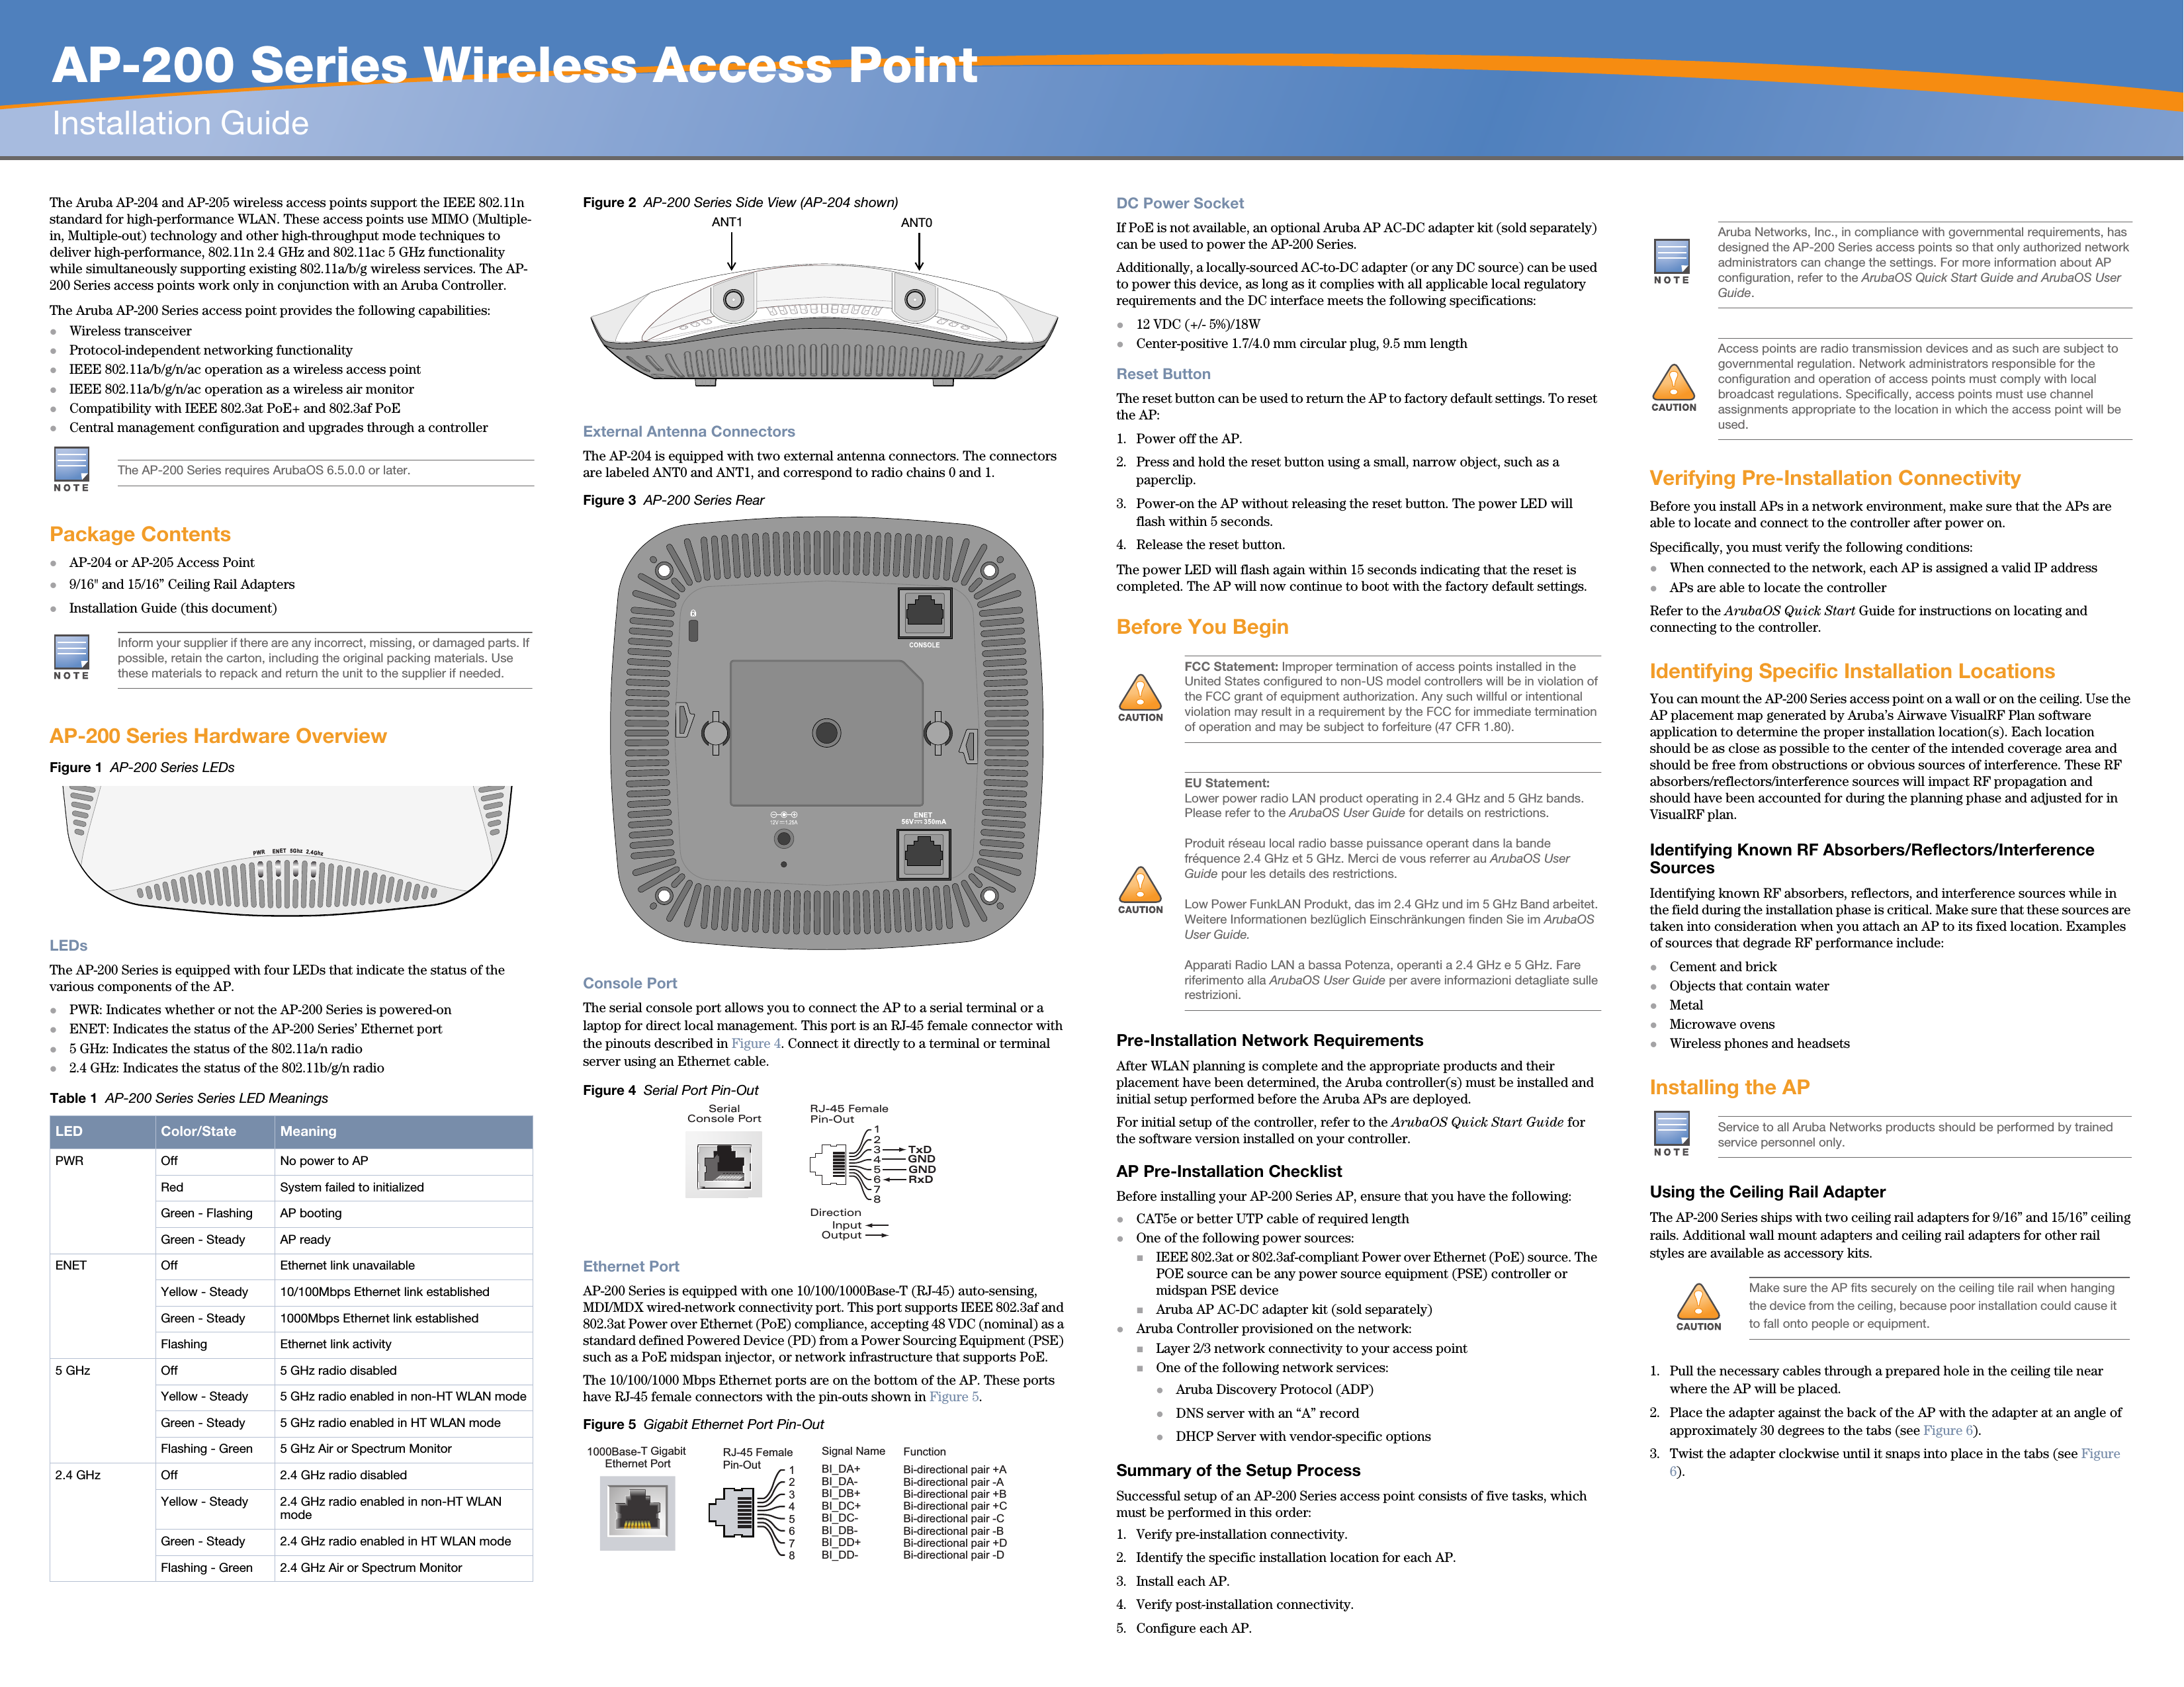   AP-200 Series Wireless Access PointInstallation GuideThe Aruba AP-204 and AP-205 wireless access points support the IEEE 802.11n standard for high-performance WLAN. These access points use MIMO (Multiple-in, Multiple-out) technology and other high-throughput mode techniques to deliver high-performance, 802.11n 2.4 GHz and 802.11ac 5 GHz functionality while simultaneously supporting existing 802.11a/b/g wireless services. The AP-200 Series access points work only in conjunction with an Aruba Controller.The Aruba AP-200 Series access point provides the following capabilities:Wireless transceiverProtocol-independent networking functionalityIEEE 802.11a/b/g/n/ac operation as a wireless access pointIEEE 802.11a/b/g/n/ac operation as a wireless air monitorCompatibility with IEEE 802.3at PoE+ and 802.3af PoE Central management configuration and upgrades through a controllerPackage ContentsAP-204 or AP-205 Access Point 9/16&quot; and 15/16” Ceiling Rail AdaptersInstallation Guide (this document)AP-200 Series Hardware OverviewFigure 1  AP-200 Series LEDsLEDsThe AP-200 Series is equipped with four LEDs that indicate the status of the various components of the AP.PWR: Indicates whether or not the AP-200 Series is powered-onENET: Indicates the status of the AP-200 Series’ Ethernet port5 GHz: Indicates the status of the 802.11a/n radio2.4 GHz: Indicates the status of the 802.11b/g/n radioFigure 2  AP-200 Series Side View (AP-204 shown) External Antenna ConnectorsThe AP-204 is equipped with two external antenna connectors. The connectors are labeled ANT0 and ANT1, and correspond to radio chains 0 and 1. Figure 3  AP-200 Series RearConsole PortThe serial console port allows you to connect the AP to a serial terminal or a laptop for direct local management. This port is an RJ-45 female connector with the pinouts described in Figure 4. Connect it directly to a terminal or terminal server using an Ethernet cable.Figure 4  Serial Port Pin-OutEthernet PortAP-200 Series is equipped with one 10/100/1000Base-T (RJ-45) auto-sensing, MDI/MDX wired-network connectivity port. This port supports IEEE 802.3af and 802.3at Power over Ethernet (PoE) compliance, accepting 48 VDC (nominal) as a standard defined Powered Device (PD) from a Power Sourcing Equipment (PSE) such as a PoE midspan injector, or network infrastructure that supports PoE.The 10/100/1000 Mbps Ethernet ports are on the bottom of the AP. These ports have RJ-45 female connectors with the pin-outs shown in Figure 5.Figure 5  Gigabit Ethernet Port Pin-OutDC Power SocketIf PoE is not available, an optional Aruba AP AC-DC adapter kit (sold separately) can be used to power the AP-200 Series. Additionally, a locally-sourced AC-to-DC adapter (or any DC source) can be used to power this device, as long as it complies with all applicable local regulatory requirements and the DC interface meets the following specifications:12 VDC (+/- 5%)/18WCenter-positive 1.7/4.0 mm circular plug, 9.5 mm lengthReset ButtonThe reset button can be used to return the AP to factory default settings. To reset the AP:1. Power off the AP.2. Press and hold the reset button using a small, narrow object, such as a paperclip.3. Power-on the AP without releasing the reset button. The power LED will flash within 5 seconds.4. Release the reset button.The power LED will flash again within 15 seconds indicating that the reset is completed. The AP will now continue to boot with the factory default settings.Before You BeginPre-Installation Network RequirementsAfter WLAN planning is complete and the appropriate products and their placement have been determined, the Aruba controller(s) must be installed and initial setup performed before the Aruba APs are deployed.For initial setup of the controller, refer to the ArubaOS Quick Start Guide for the software version installed on your controller.AP Pre-Installation ChecklistBefore installing your AP-200 Series AP, ensure that you have the following:CAT5e or better UTP cable of required lengthOne of the following power sources:IEEE 802.3at or 802.3af-compliant Power over Ethernet (PoE) source. The POE source can be any power source equipment (PSE) controller or midspan PSE deviceAruba AP AC-DC adapter kit (sold separately)Aruba Controller provisioned on the network:Layer 2/3 network connectivity to your access pointOne of the following network services:Aruba Discovery Protocol (ADP)DNS server with an “A” recordDHCP Server with vendor-specific optionsSummary of the Setup ProcessSuccessful setup of an AP-200 Series access point consists of five tasks, which must be performed in this order:1. Verify pre-installation connectivity.2. Identify the specific installation location for each AP.3. Install each AP.4. Verify post-installation connectivity.5. Configure each AP.Verifying Pre-Installation ConnectivityBefore you install APs in a network environment, make sure that the APs are able to locate and connect to the controller after power on.Specifically, you must verify the following conditions:When connected to the network, each AP is assigned a valid IP addressAPs are able to locate the controller Refer to the ArubaOS Quick Start Guide for instructions on locating and connecting to the controller.Identifying Specific Installation LocationsYou can mount the AP-200 Series access point on a wall or on the ceiling. Use the AP placement map generated by Aruba’s Airwave VisualRF Plan software application to determine the proper installation location(s). Each location should be as close as possible to the center of the intended coverage area and should be free from obstructions or obvious sources of interference. These RF absorbers/reflectors/interference sources will impact RF propagation and should have been accounted for during the planning phase and adjusted for in VisualRF plan.Identifying Known RF Absorbers/Reflectors/Interference SourcesIdentifying known RF absorbers, reflectors, and interference sources while in the field during the installation phase is critical. Make sure that these sources are taken into consideration when you attach an AP to its fixed location. Examples of sources that degrade RF performance include:Cement and brickObjects that contain waterMetalMicrowave ovensWireless phones and headsetsInstalling the APUsing the Ceiling Rail AdapterThe AP-200 Series ships with two ceiling rail adapters for 9/16” and 15/16” ceiling rails. Additional wall mount adapters and ceiling rail adapters for other rail styles are available as accessory kits.1. Pull the necessary cables through a prepared hole in the ceiling tile near where the AP will be placed.2. Place the adapter against the back of the AP with the adapter at an angle of approximately 30 degrees to the tabs (see Figure 6).3. Twist the adapter clockwise until it snaps into place in the tabs (see Figure 6).The AP-200 Series requires ArubaOS 6.5.0.0 or later.Inform your supplier if there are any incorrect, missing, or damaged parts. If possible, retain the carton, including the original packing materials. Use these materials to repack and return the unit to the supplier if needed.Table 1  AP-200 Series Series LED MeaningsLED Color/State MeaningPWR Off No power to APRed System failed to initializedGreen - Flashing AP bootingGreen - Steady AP readyENET Off Ethernet link unavailableYellow - Steady 10/100Mbps Ethernet link establishedGreen - Steady 1000Mbps Ethernet link establishedFlashing Ethernet link activity5 GHz Off 5 GHz radio disabledYellow - Steady 5 GHz radio enabled in non-HT WLAN modeGreen - Steady 5 GHz radio enabled in HT WLAN modeFlashing - Green  5 GHz Air or Spectrum Monitor2.4 GHz Off 2.4 GHz radio disabledYellow - Steady 2.4 GHz radio enabled in non-HT WLAN modeGreen - Steady 2.4 GHz radio enabled in HT WLAN modeFlashing - Green  2.4 GHz Air or Spectrum Monitor2.4Ghz5GhzENETPWRANT0ANT1SerialConsole Port12345678TxDGNDRxDRJ-45 FemalePin-OutDirectionInputOutputGND1000Base-T Gigabit Ethernet PortRJ-45 FemalePin-OutSignal Name12345678BI_DC+BI_DC-BI_DD+BI_DD-BI_DA+BI_DA-BI_DB+BI_DB-FunctionBi-directional pair +CBi-directional pair -CBi-directional pair +DBi-directional pair -DBi-directional pair +ABi-directional pair -ABi-directional pair +BBi-directional pair -B     !FCC Statement: Improper termination of access points installed in the United States configured to non-US model controllers will be in violation of the FCC grant of equipment authorization. Any such willful or intentional violation may result in a requirement by the FCC for immediate termination of operation and may be subject to forfeiture (47 CFR 1.80).!EU Statement: Lower power radio LAN product operating in 2.4 GHz and 5 GHz bands. Please refer to the ArubaOS User Guide for details on restrictions.Produit réseau local radio basse puissance operant dans la bande fréquence 2.4 GHz et 5 GHz. Merci de vous referrer au ArubaOS User Guide pour les details des restrictions.Low Power FunkLAN Produkt, das im 2.4 GHz und im 5 GHz Band arbeitet. Weitere Informationen bezlüglich Einschränkungen finden Sie im ArubaOS User Guide.Apparati Radio LAN a bassa Potenza, operanti a 2.4 GHz e 5 GHz. Fare riferimento alla ArubaOS User Guide per avere informazioni detagliate sulle restrizioni.Aruba Networks, Inc., in compliance with governmental requirements, has designed the AP-200 Series access points so that only authorized network administrators can change the settings. For more information about AP configuration, refer to the ArubaOS Quick Start Guide and ArubaOS User Guide.!Access points are radio transmission devices and as such are subject to governmental regulation. Network administrators responsible for the configuration and operation of access points must comply with local broadcast regulations. Specifically, access points must use channel assignments appropriate to the location in which the access point will be used.Service to all Aruba Networks products should be performed by trained service personnel only.!Make sure the AP fits securely on the ceiling tile rail when hanging the device from the ceiling, because poor installation could cause it to fall onto people or equipment.